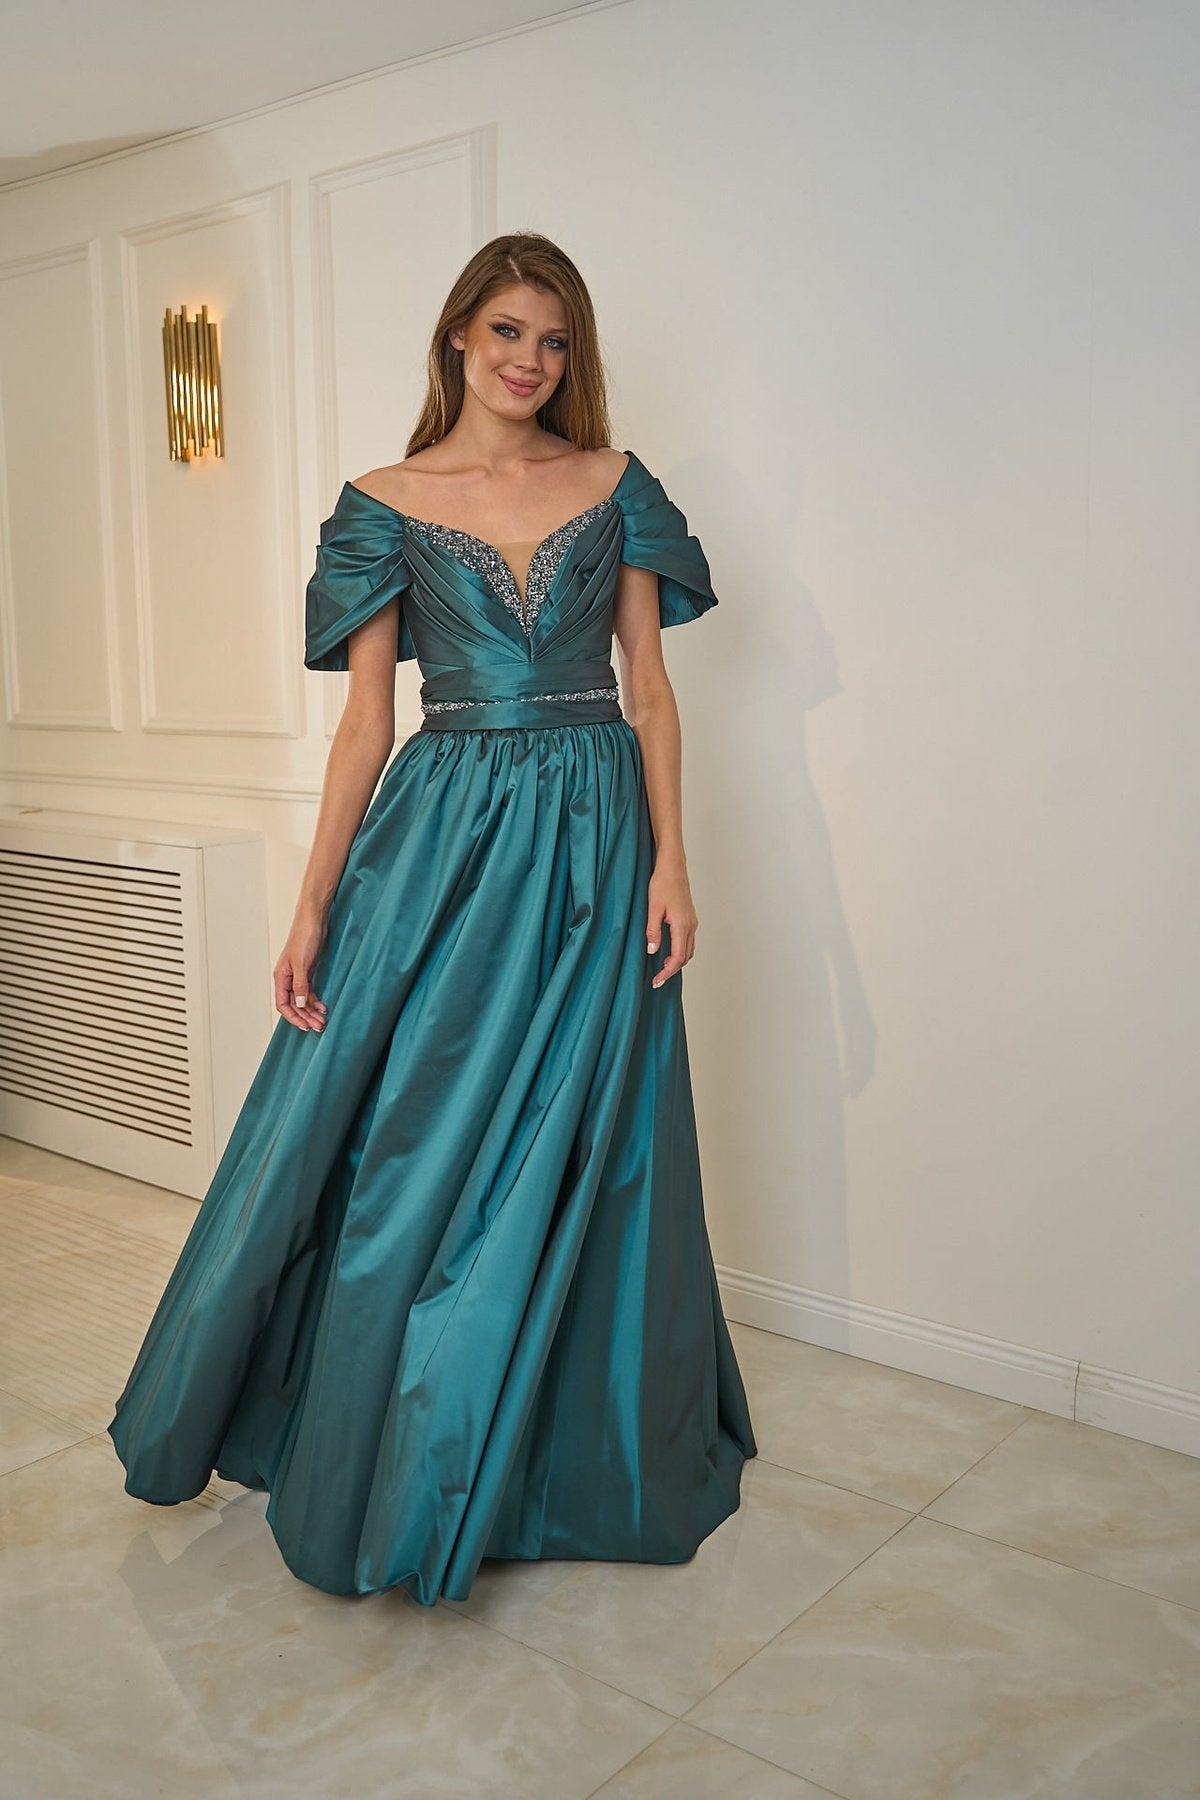 Stone Embroidered Low Sleeve Belt Detailed Long Evening Dress